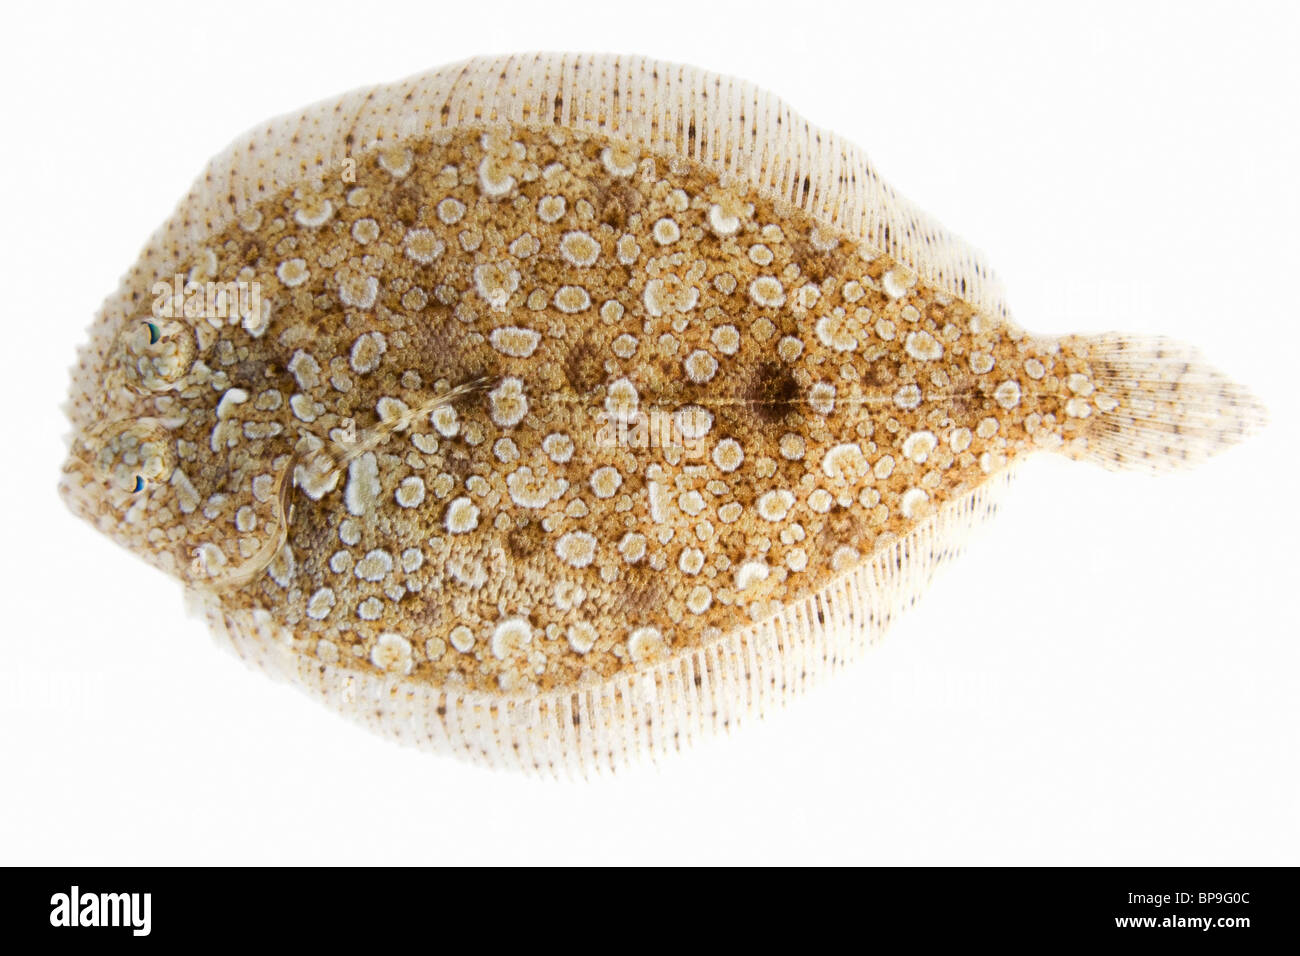 Close-up photo on white background of a flounder, camouflaged as sand. If lying still, it is very hard to spot. Stock Photo